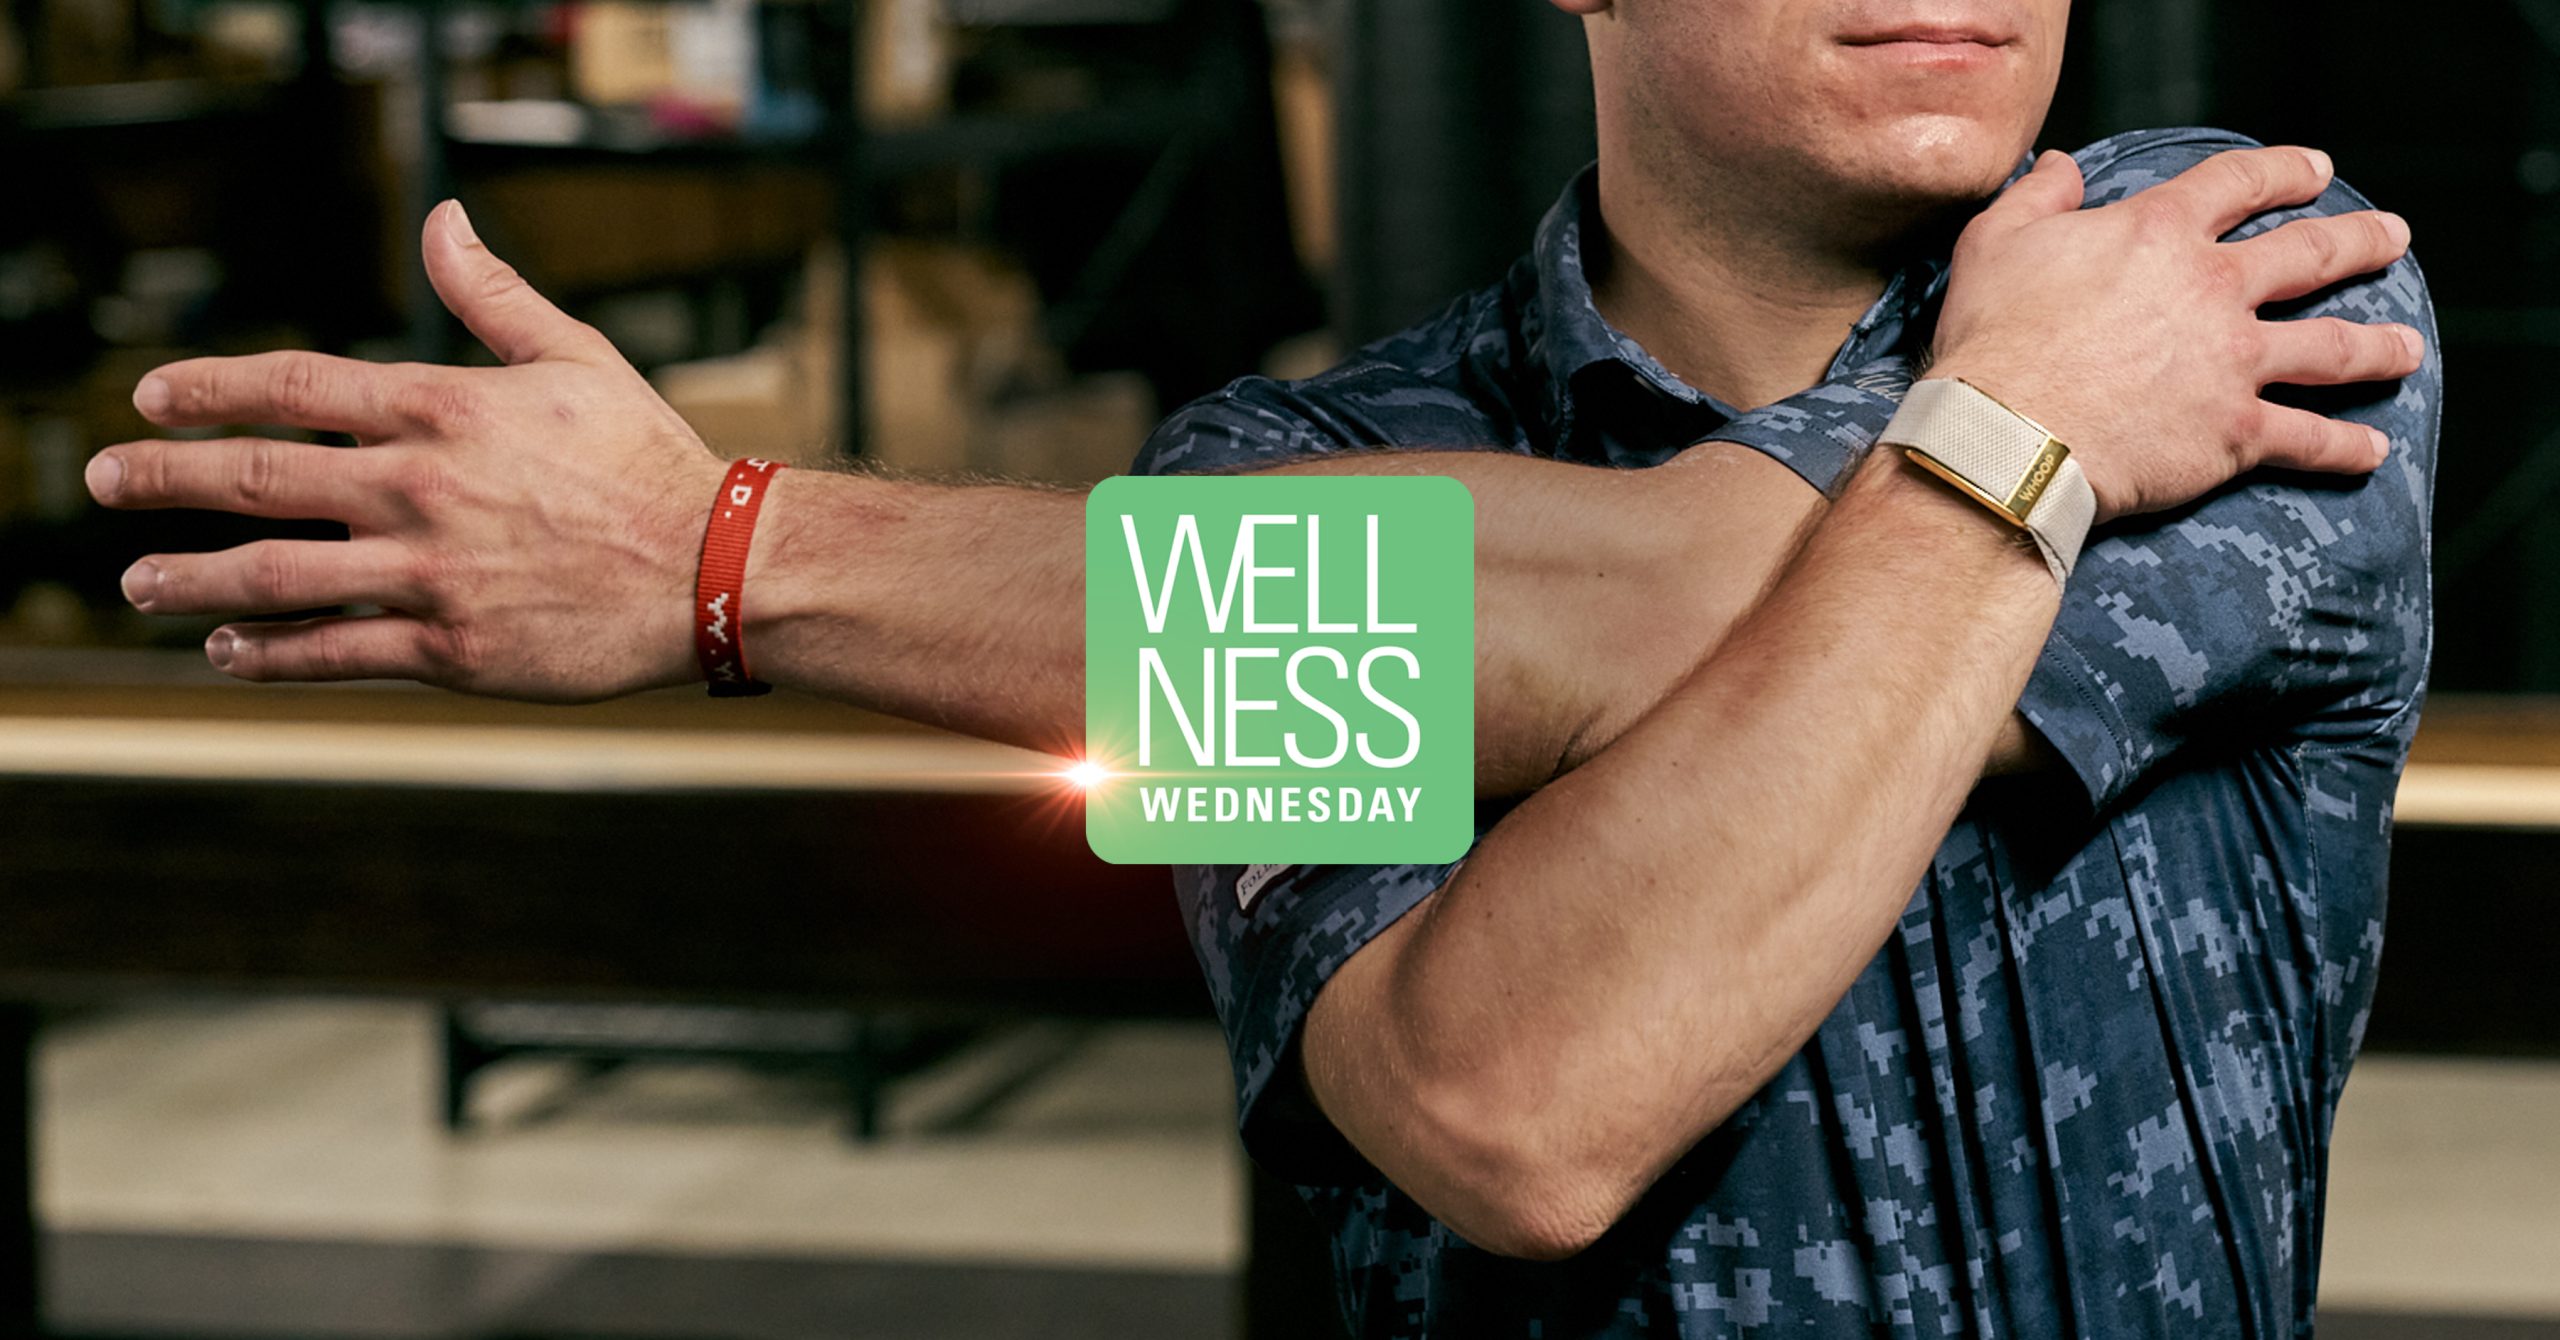 Wellness Wednesday: 3 Ways to Power-Up Your Day